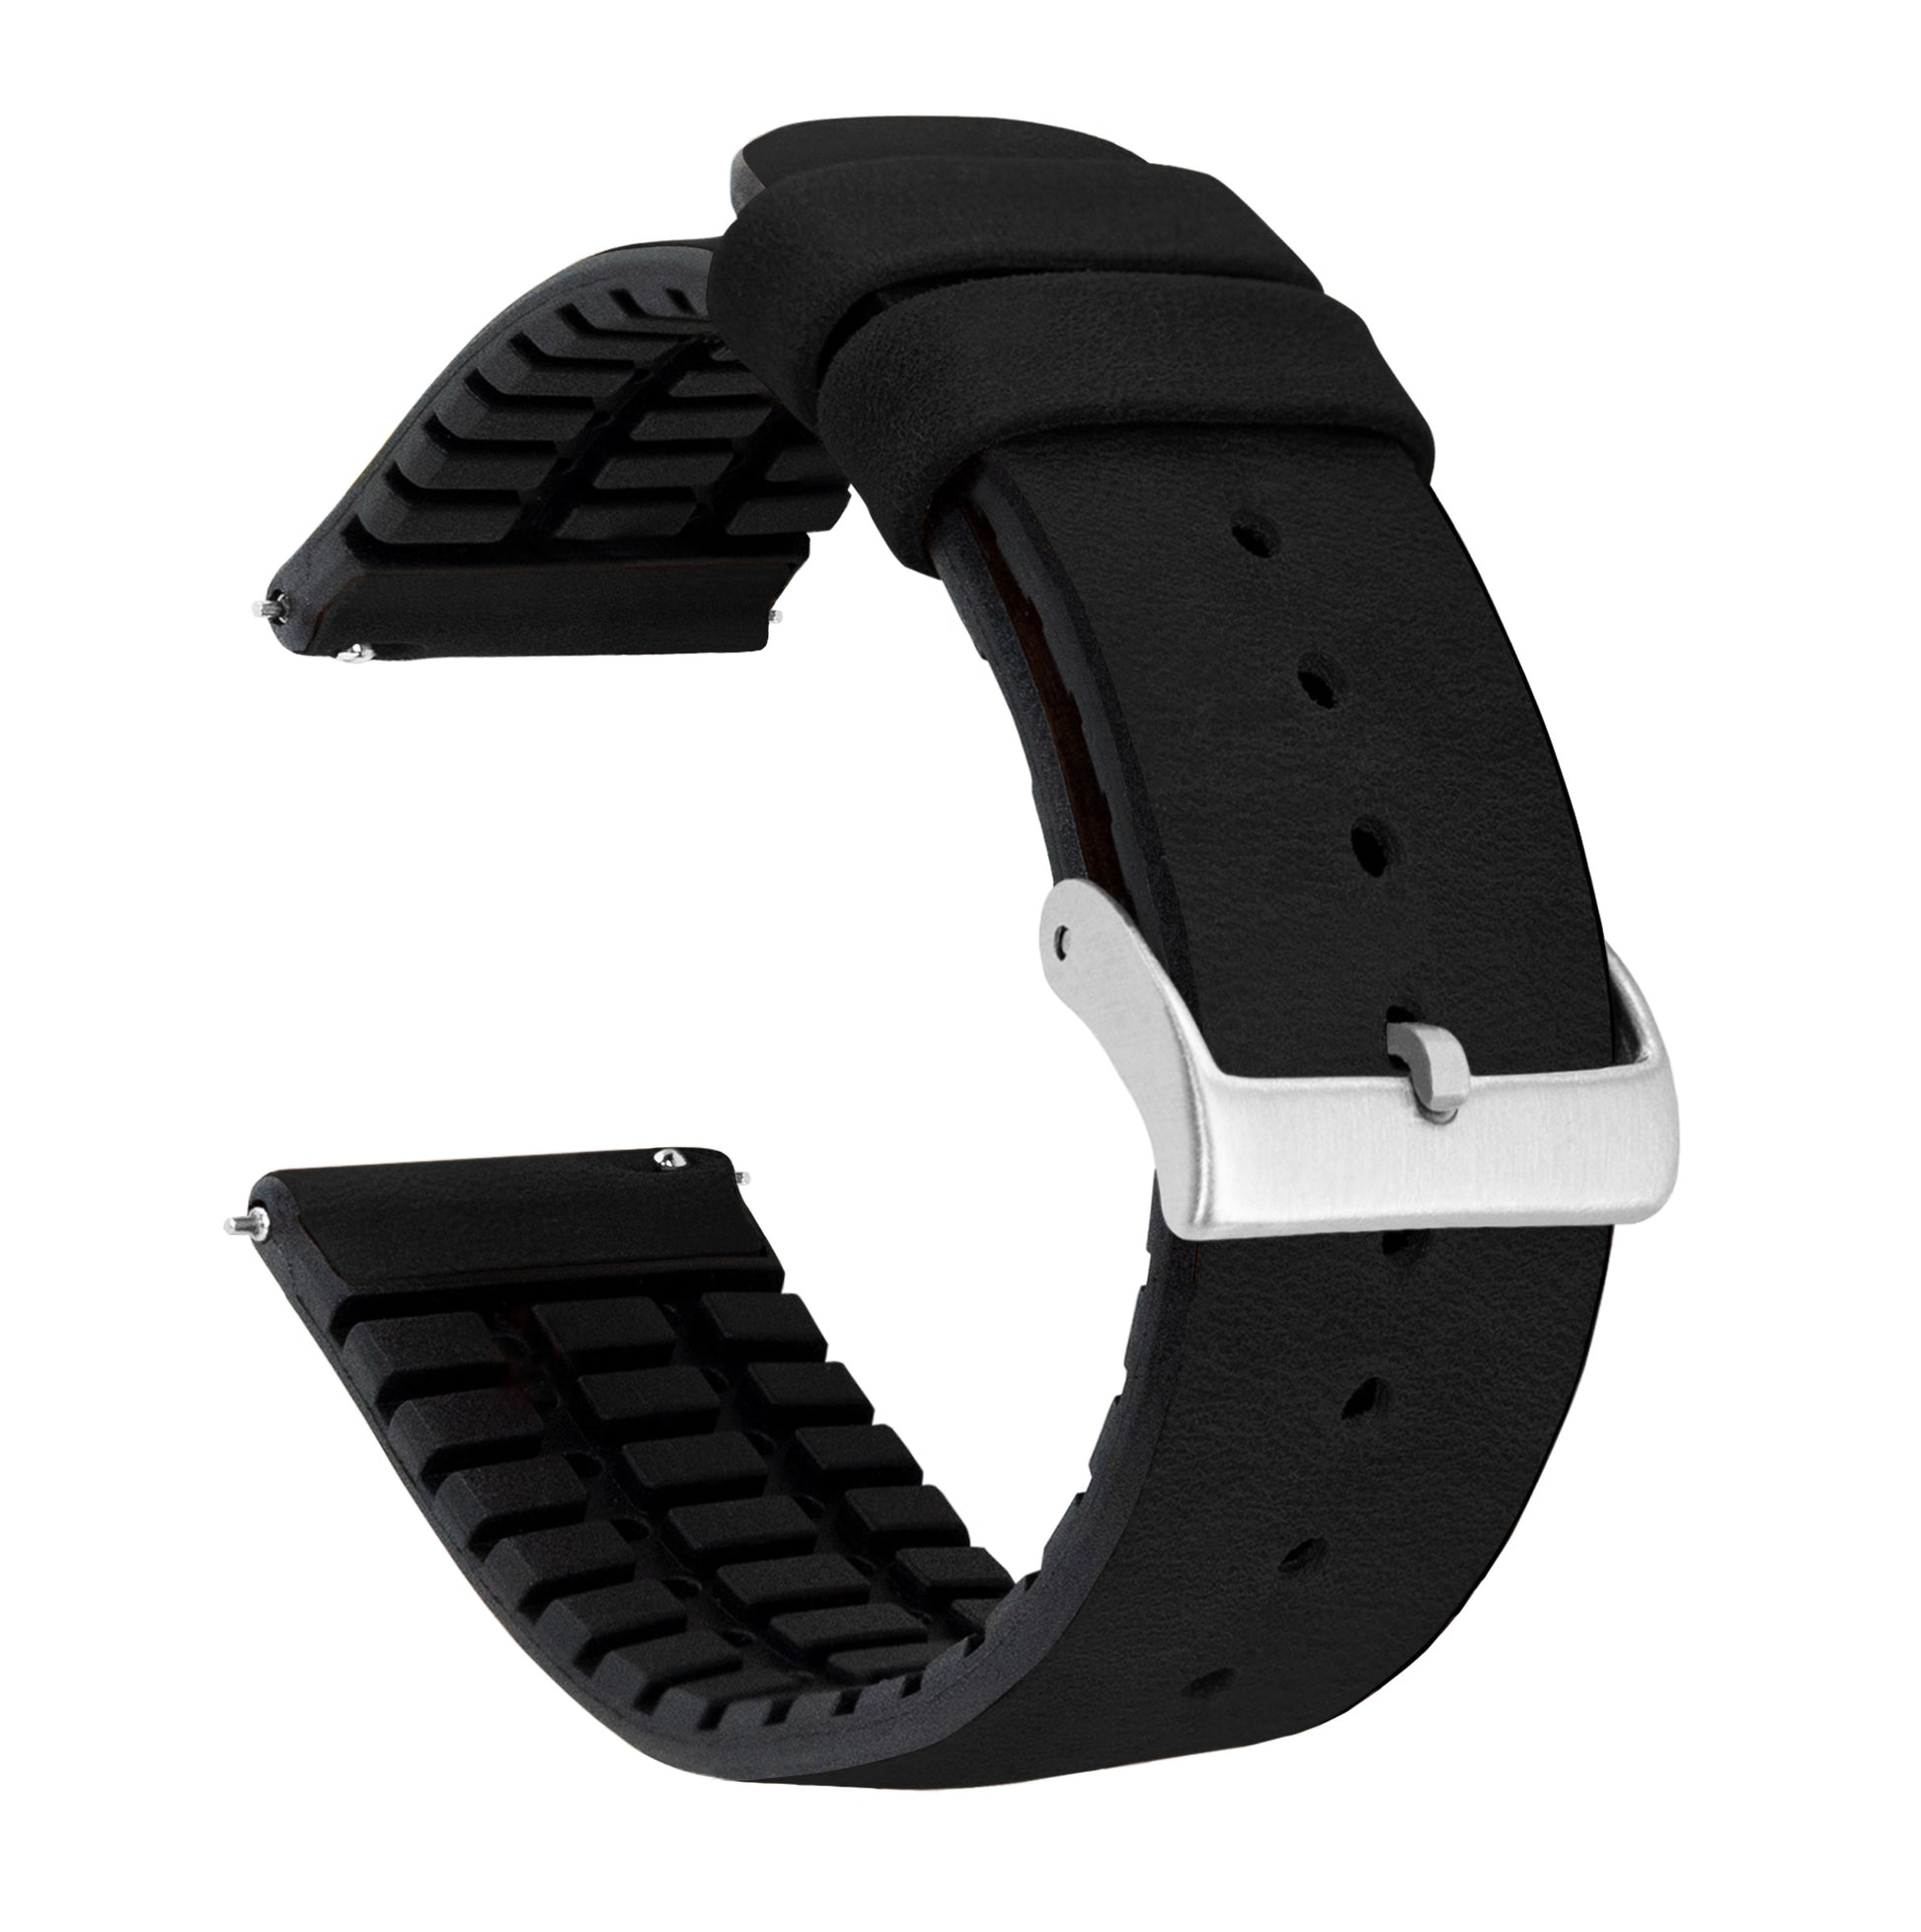 Amazfit Bip | Leather and Rubber Hybrid | Black - Barton Watch Bands